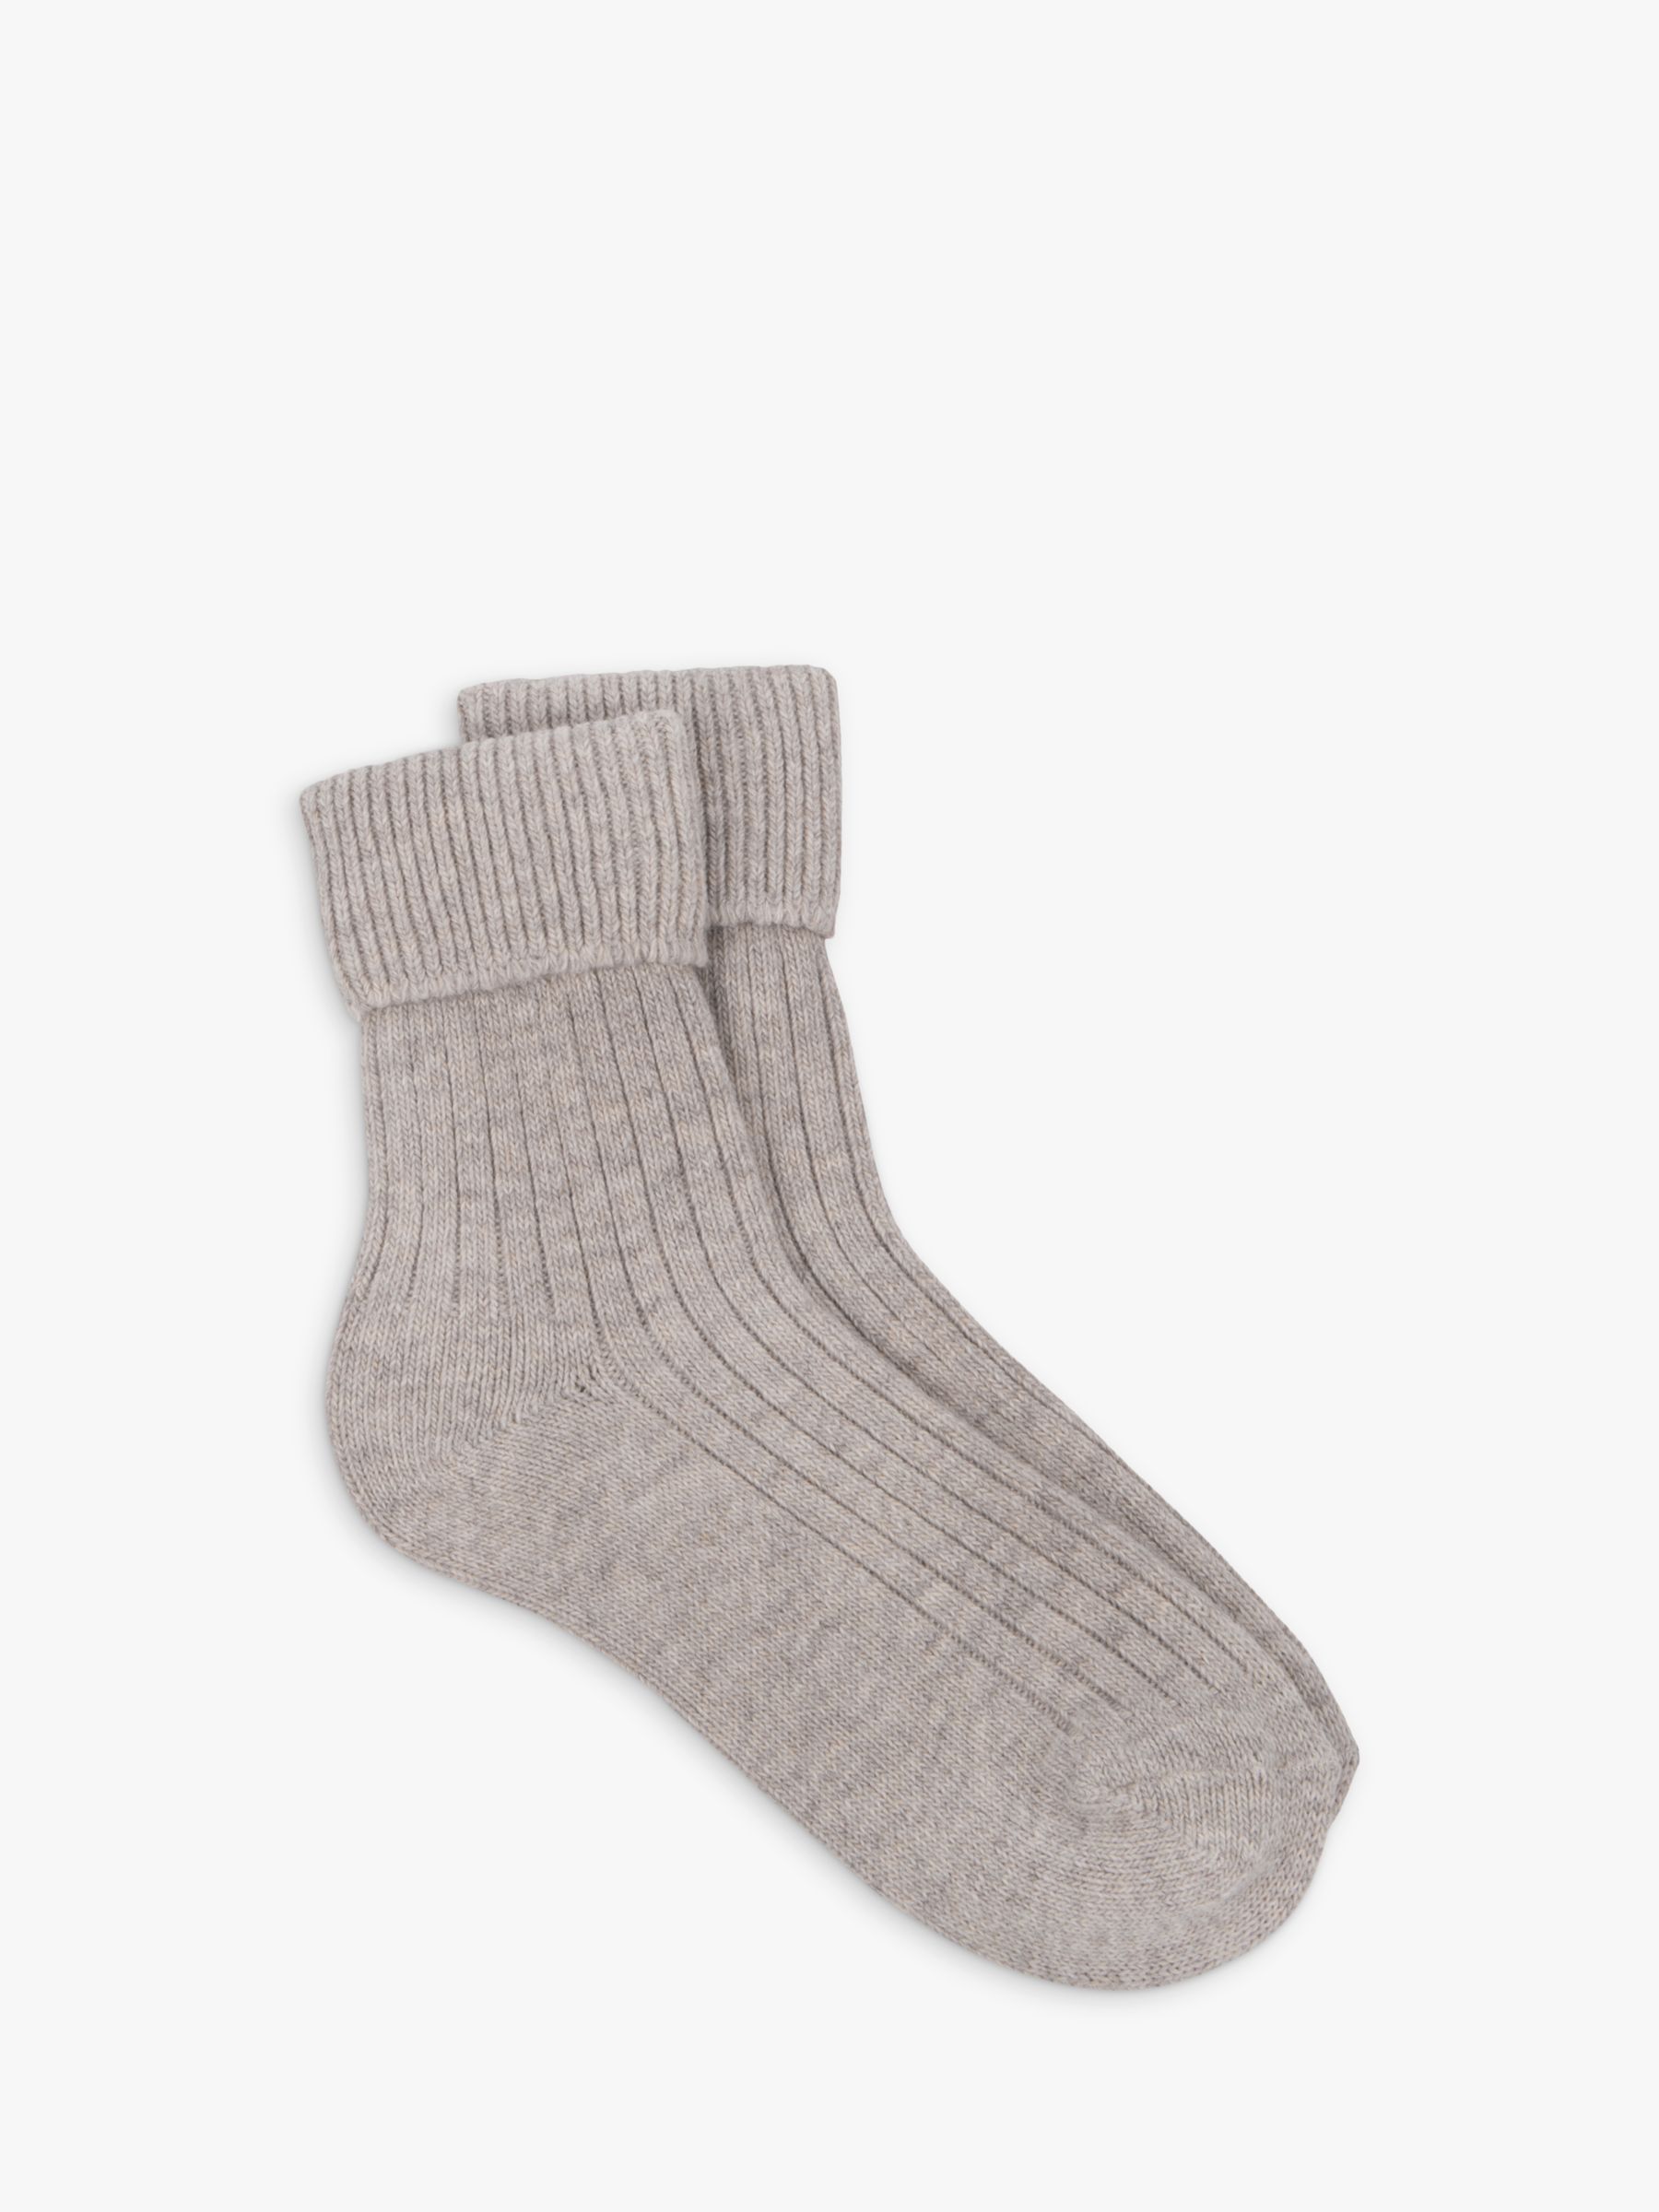 totes Wool and Cashmere Blend Ribbed Ankle Socks, Mink at John Lewis ...